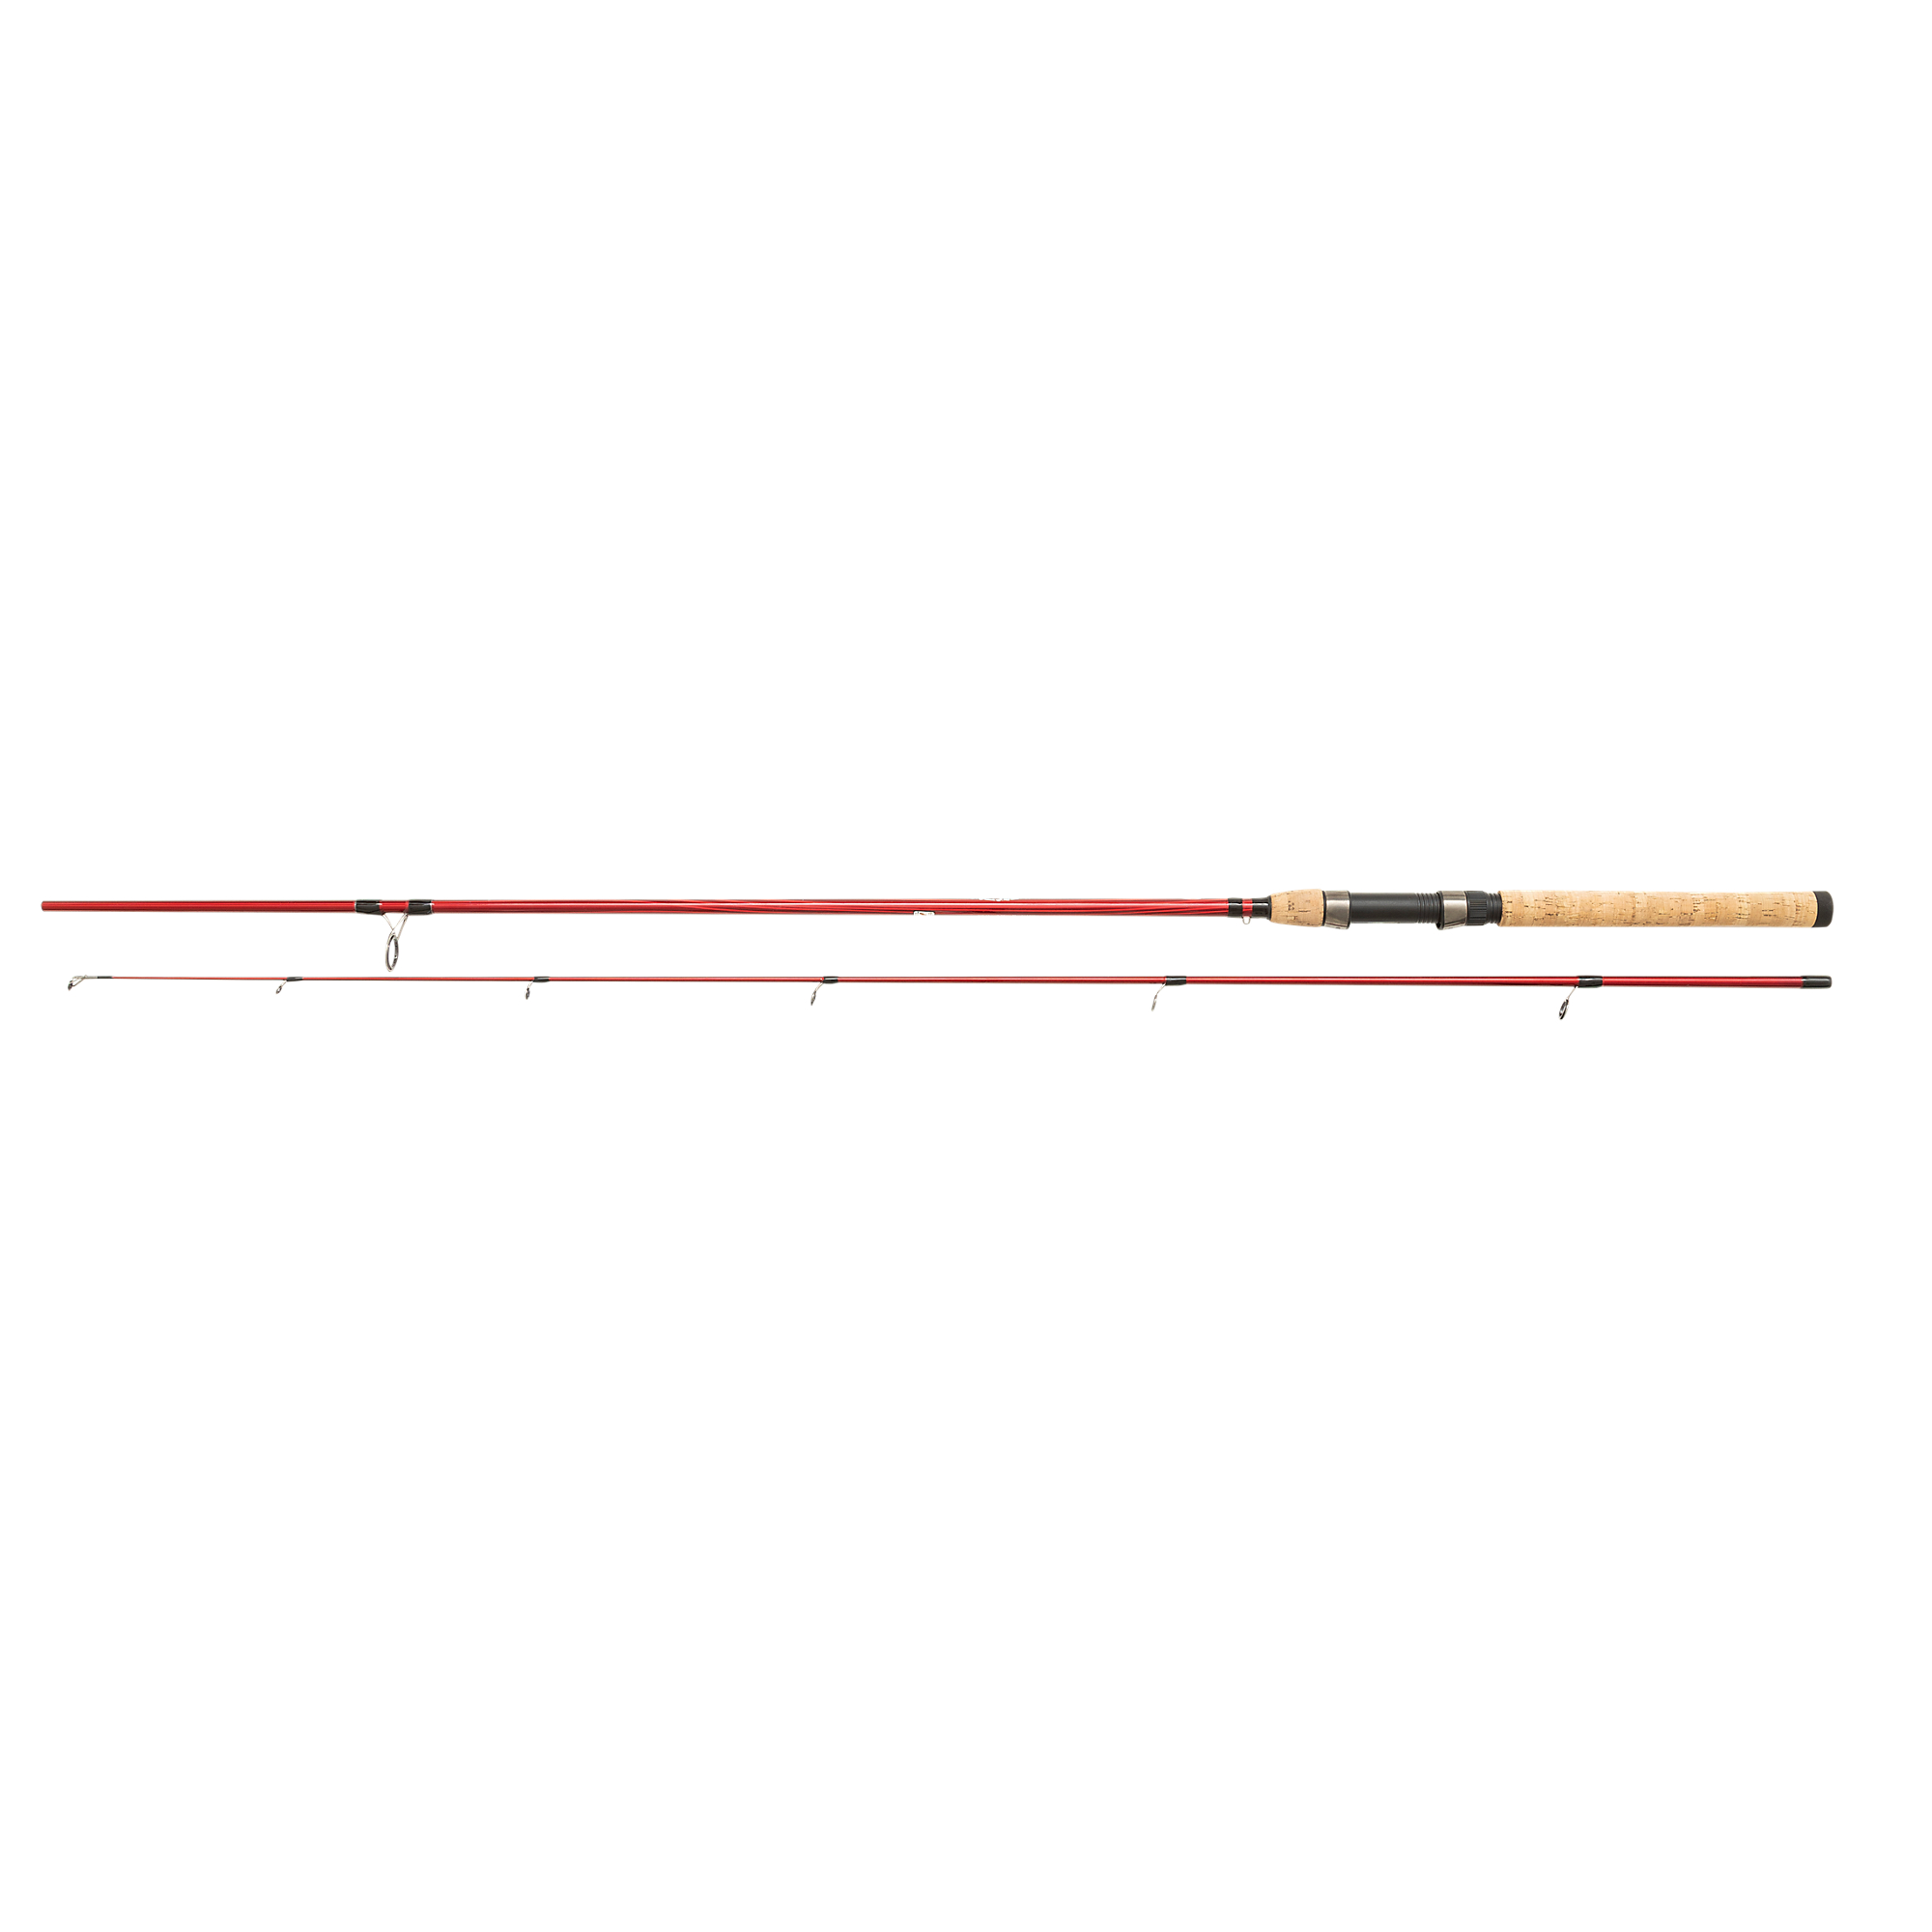 Berkley Cherrywood Original Baitcaster Rod - Attention! Here there is a spinning rod which has to be seen, this great product is a baticaster rod adapted for a reel!